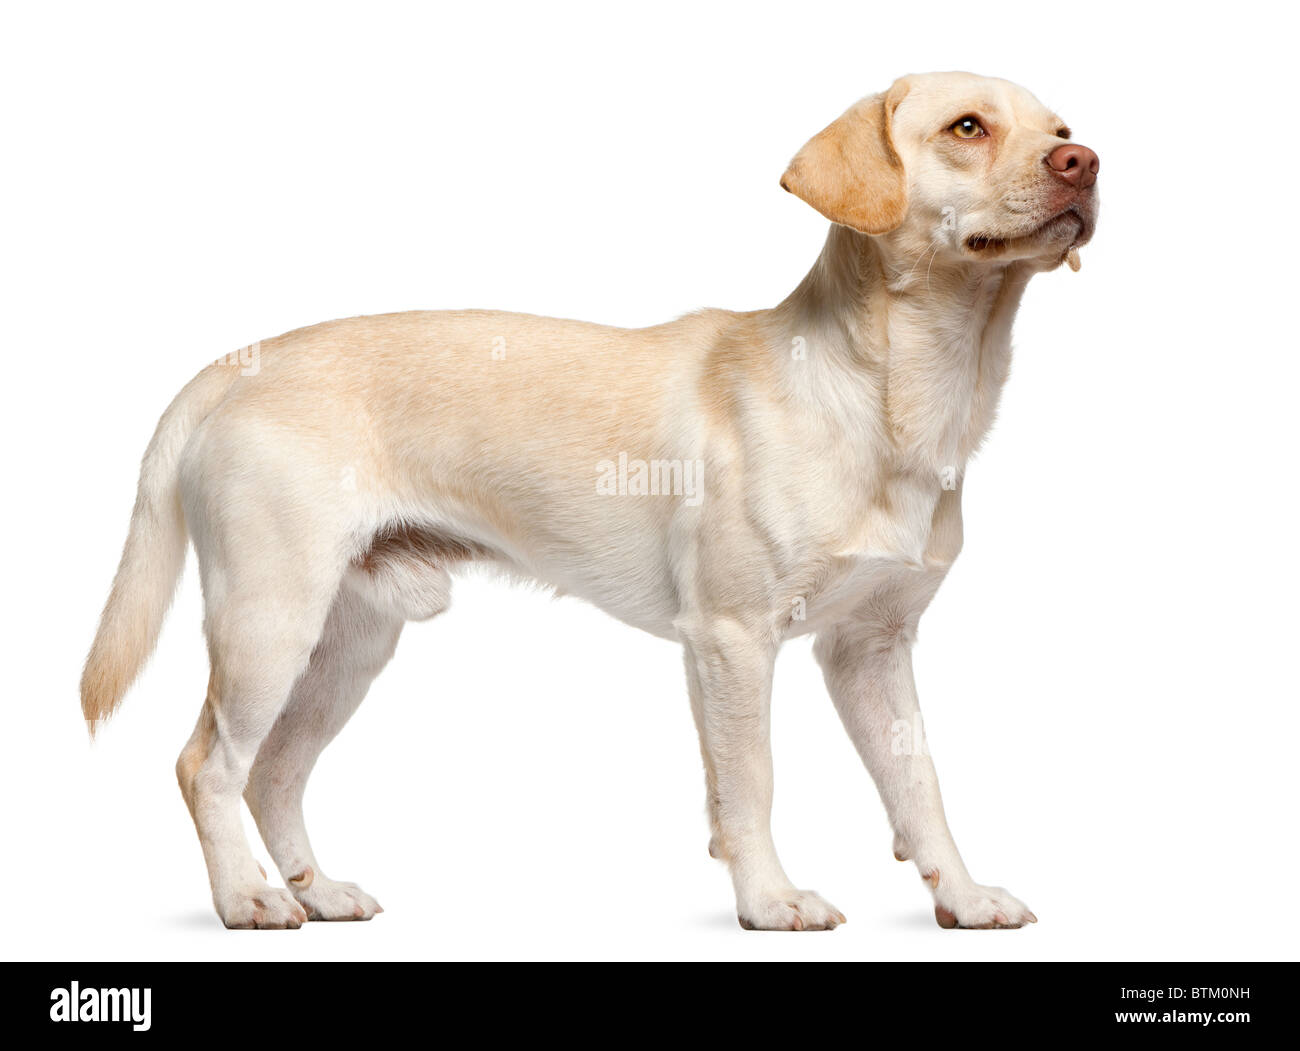 Mixed-breed dog, 12 months old, standing in front of white background Stock Photo